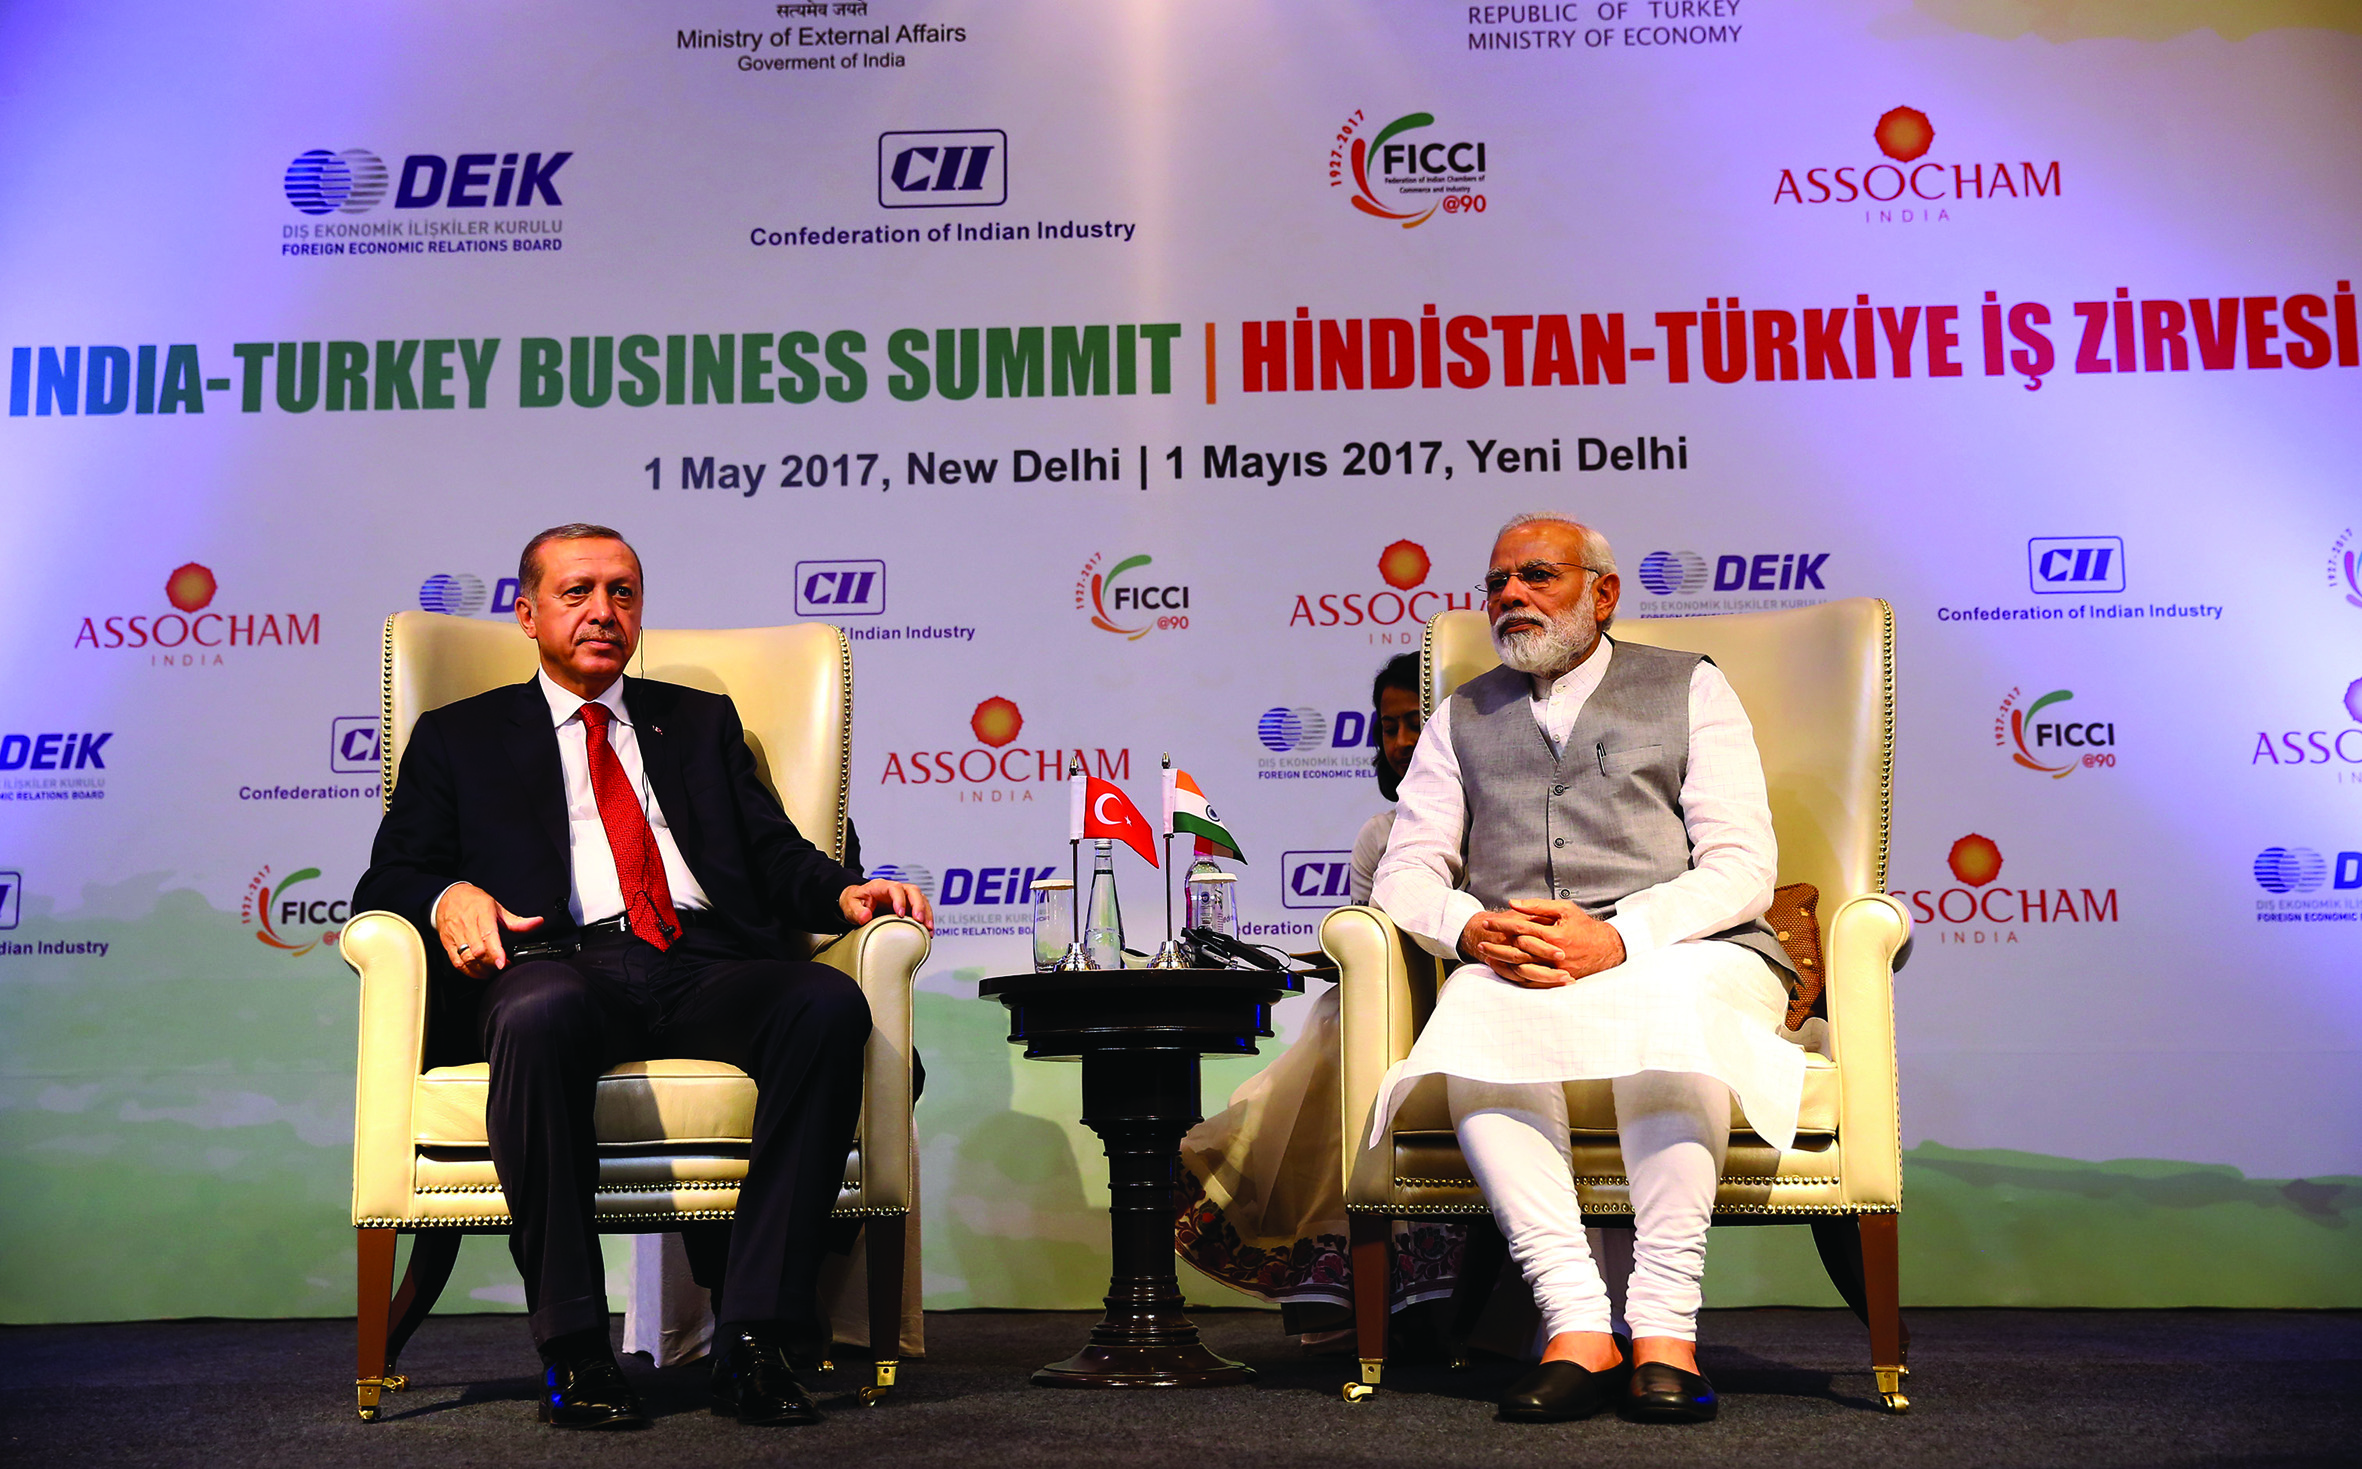 Türkiye-India Relations in the 21st Century Progress Challenges and Prospects